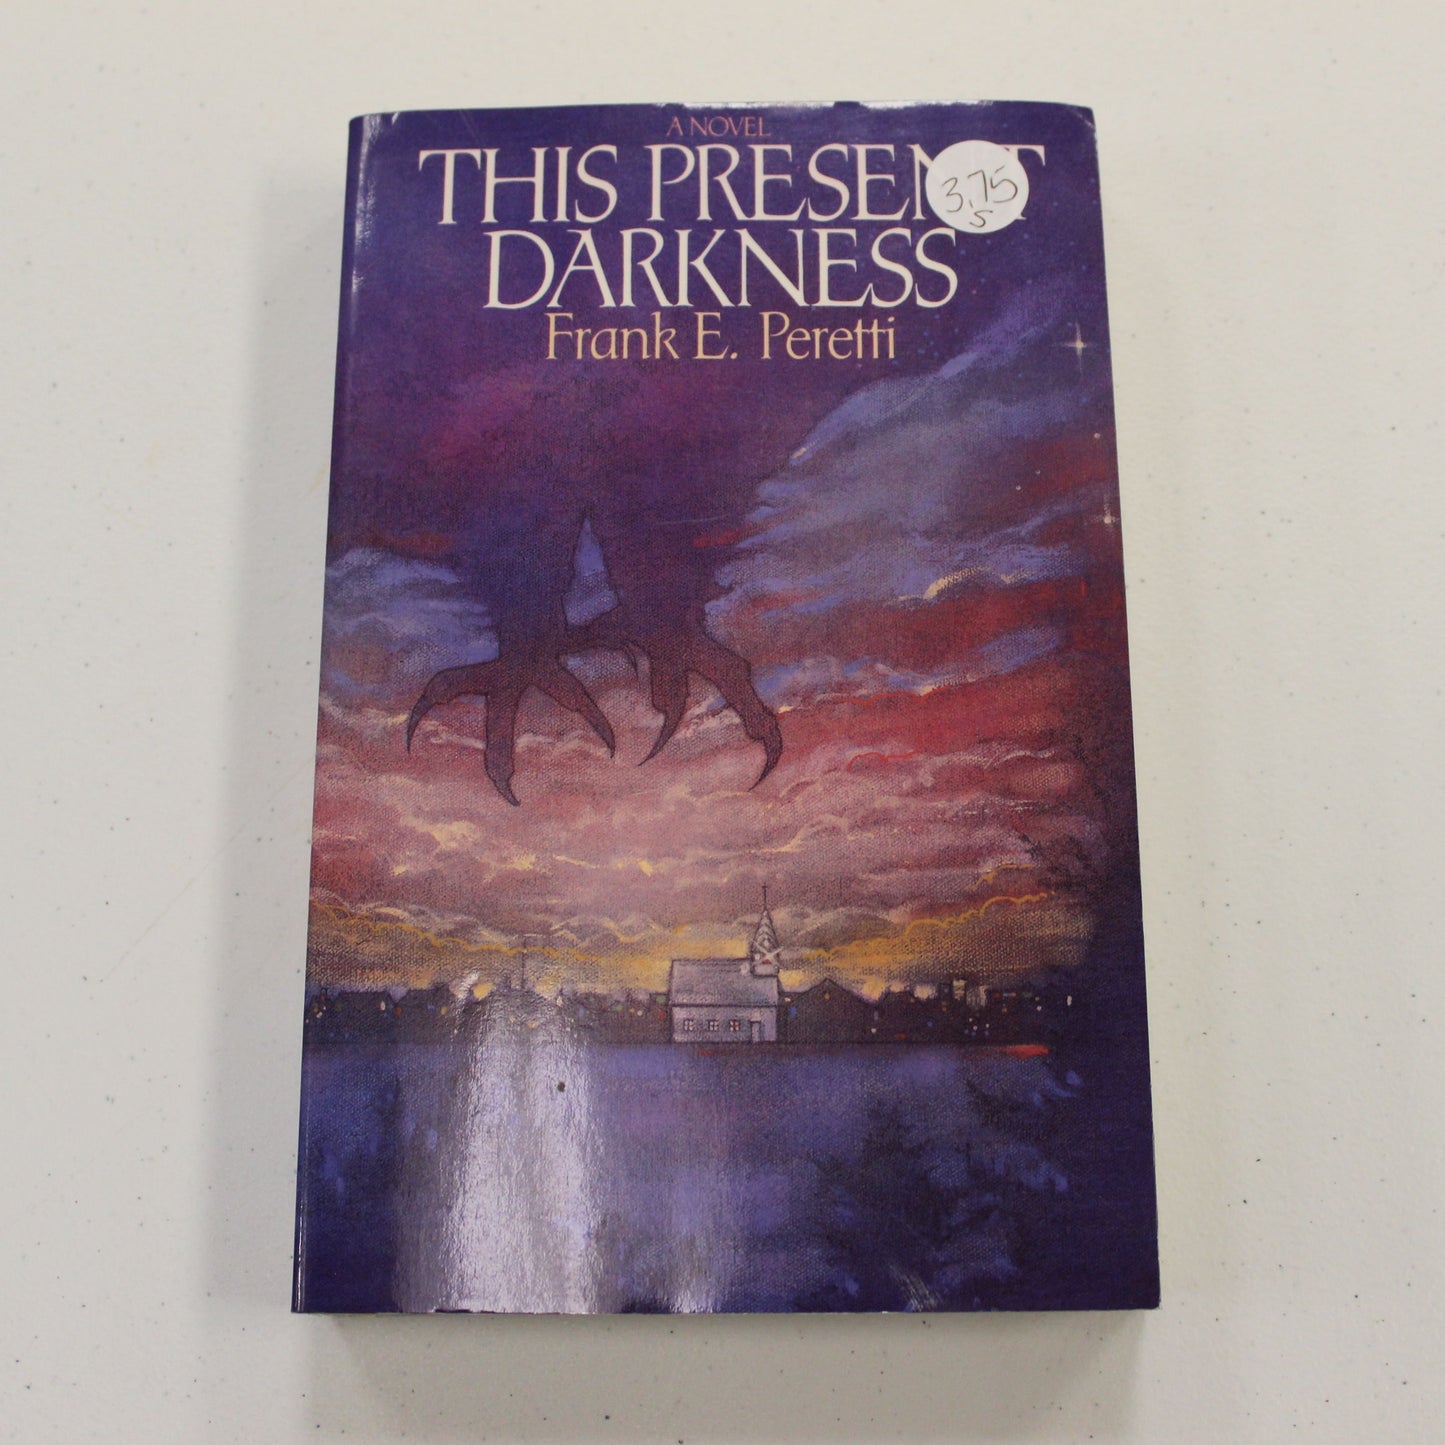 THE PRESENT DARKNESS